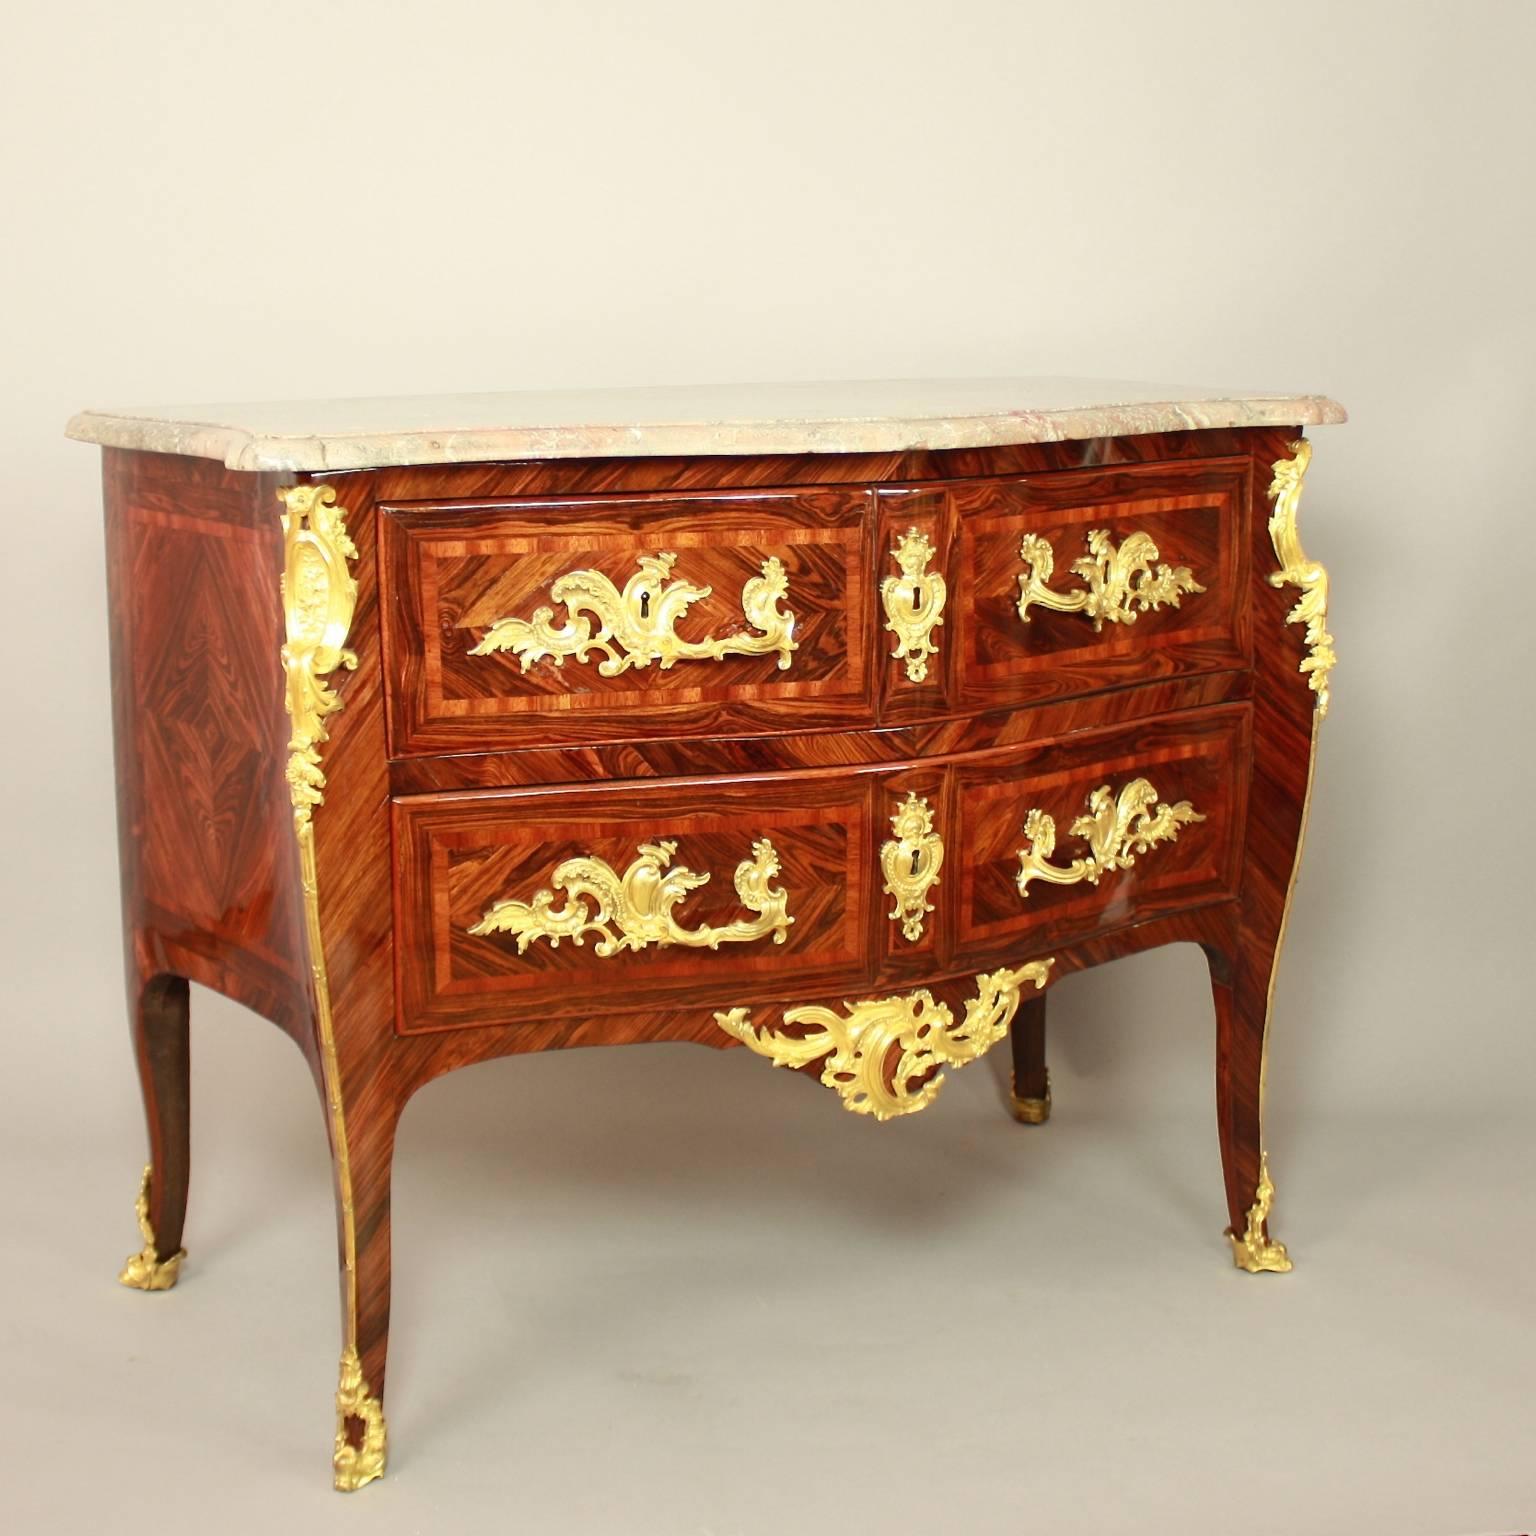 A Louis XV gilt bronze-mounted kingwood commode, stamped on the top of the left front stile carrying the name of M F Rubestuck (1722-1785). 
The commode displays a bombe front, with two small top drawers and one large bottom drawer, raised on four